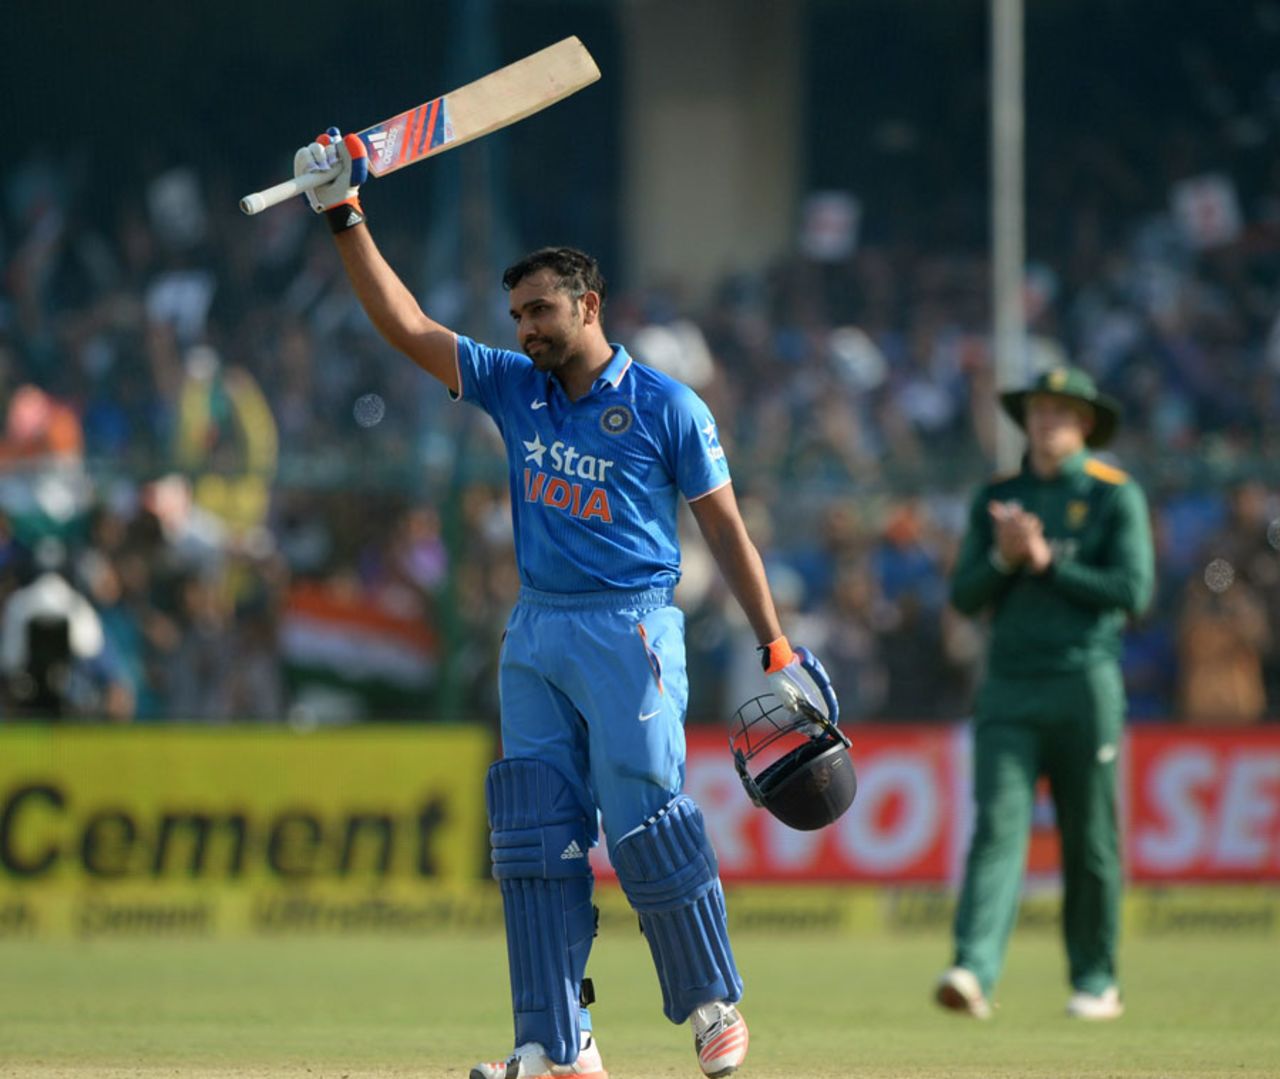 Rohit Sharma raises his bat after completing his eighth ODI century, India v South Africa, 1st ODI, Kanpur, October 11, 2015